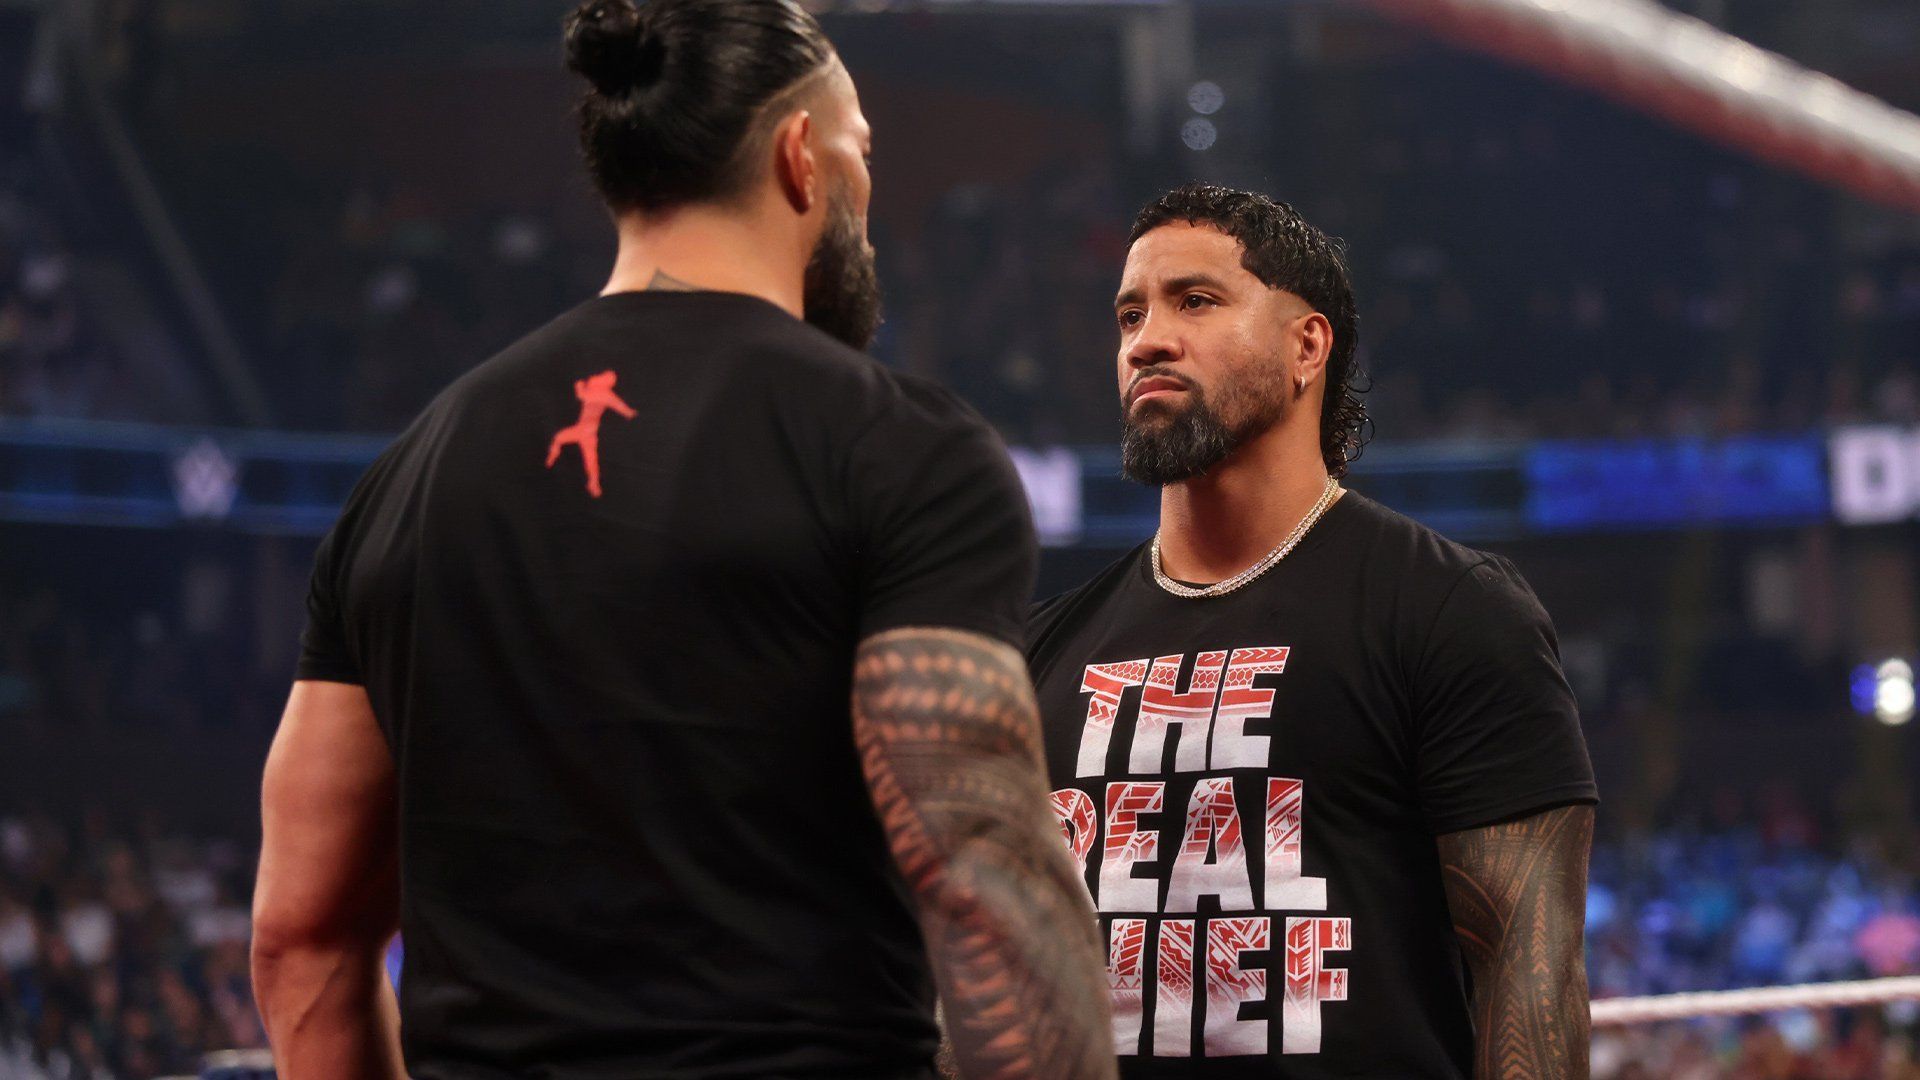 Roman Reigns and Jey Uso face off on WWE SmackDown